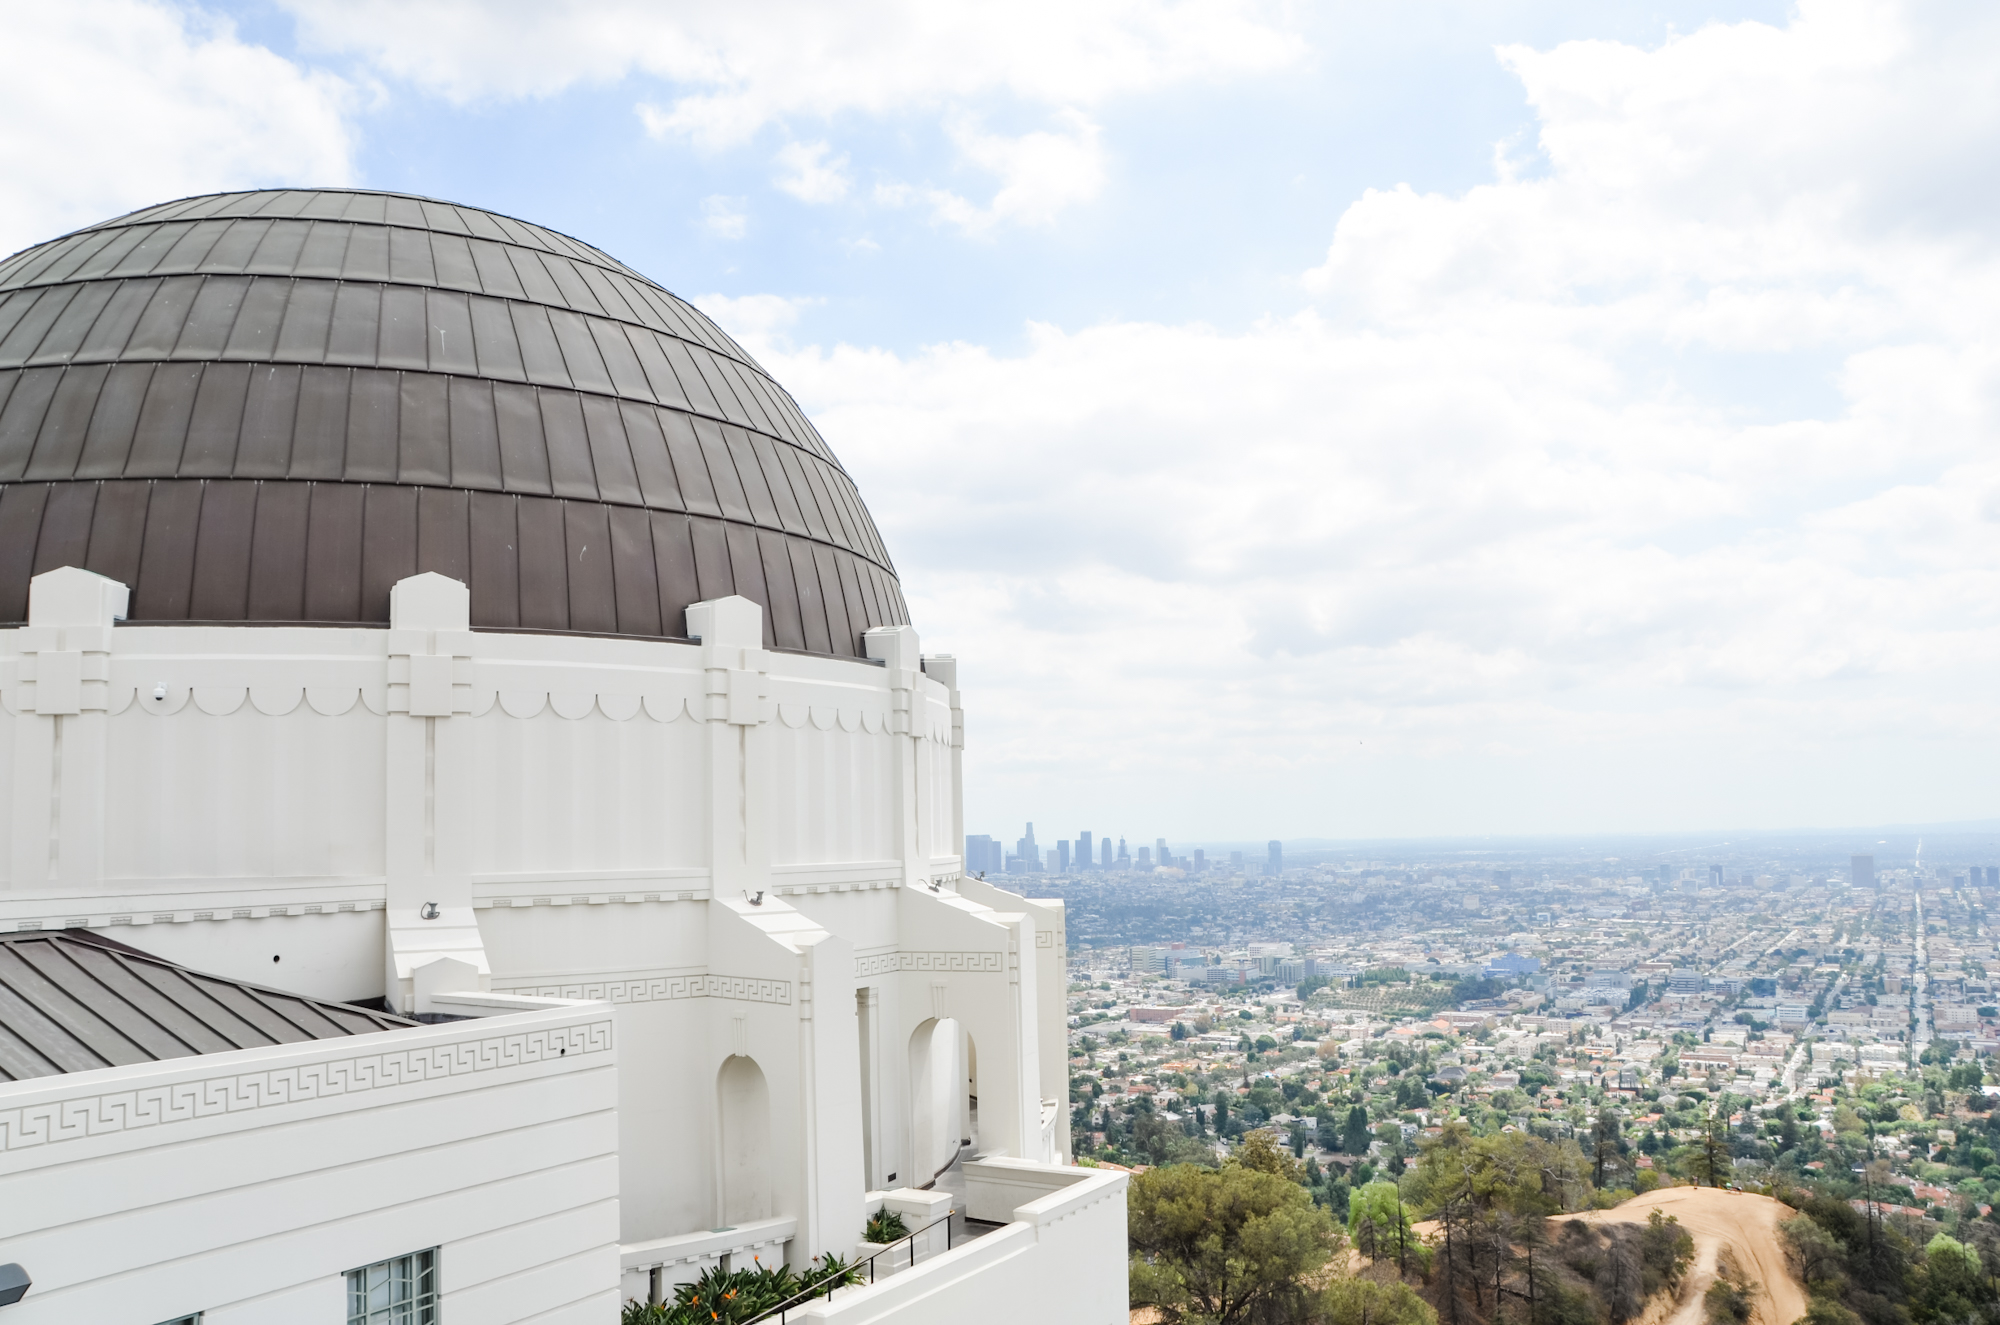 Griffith Observatory, Los Angeles, California